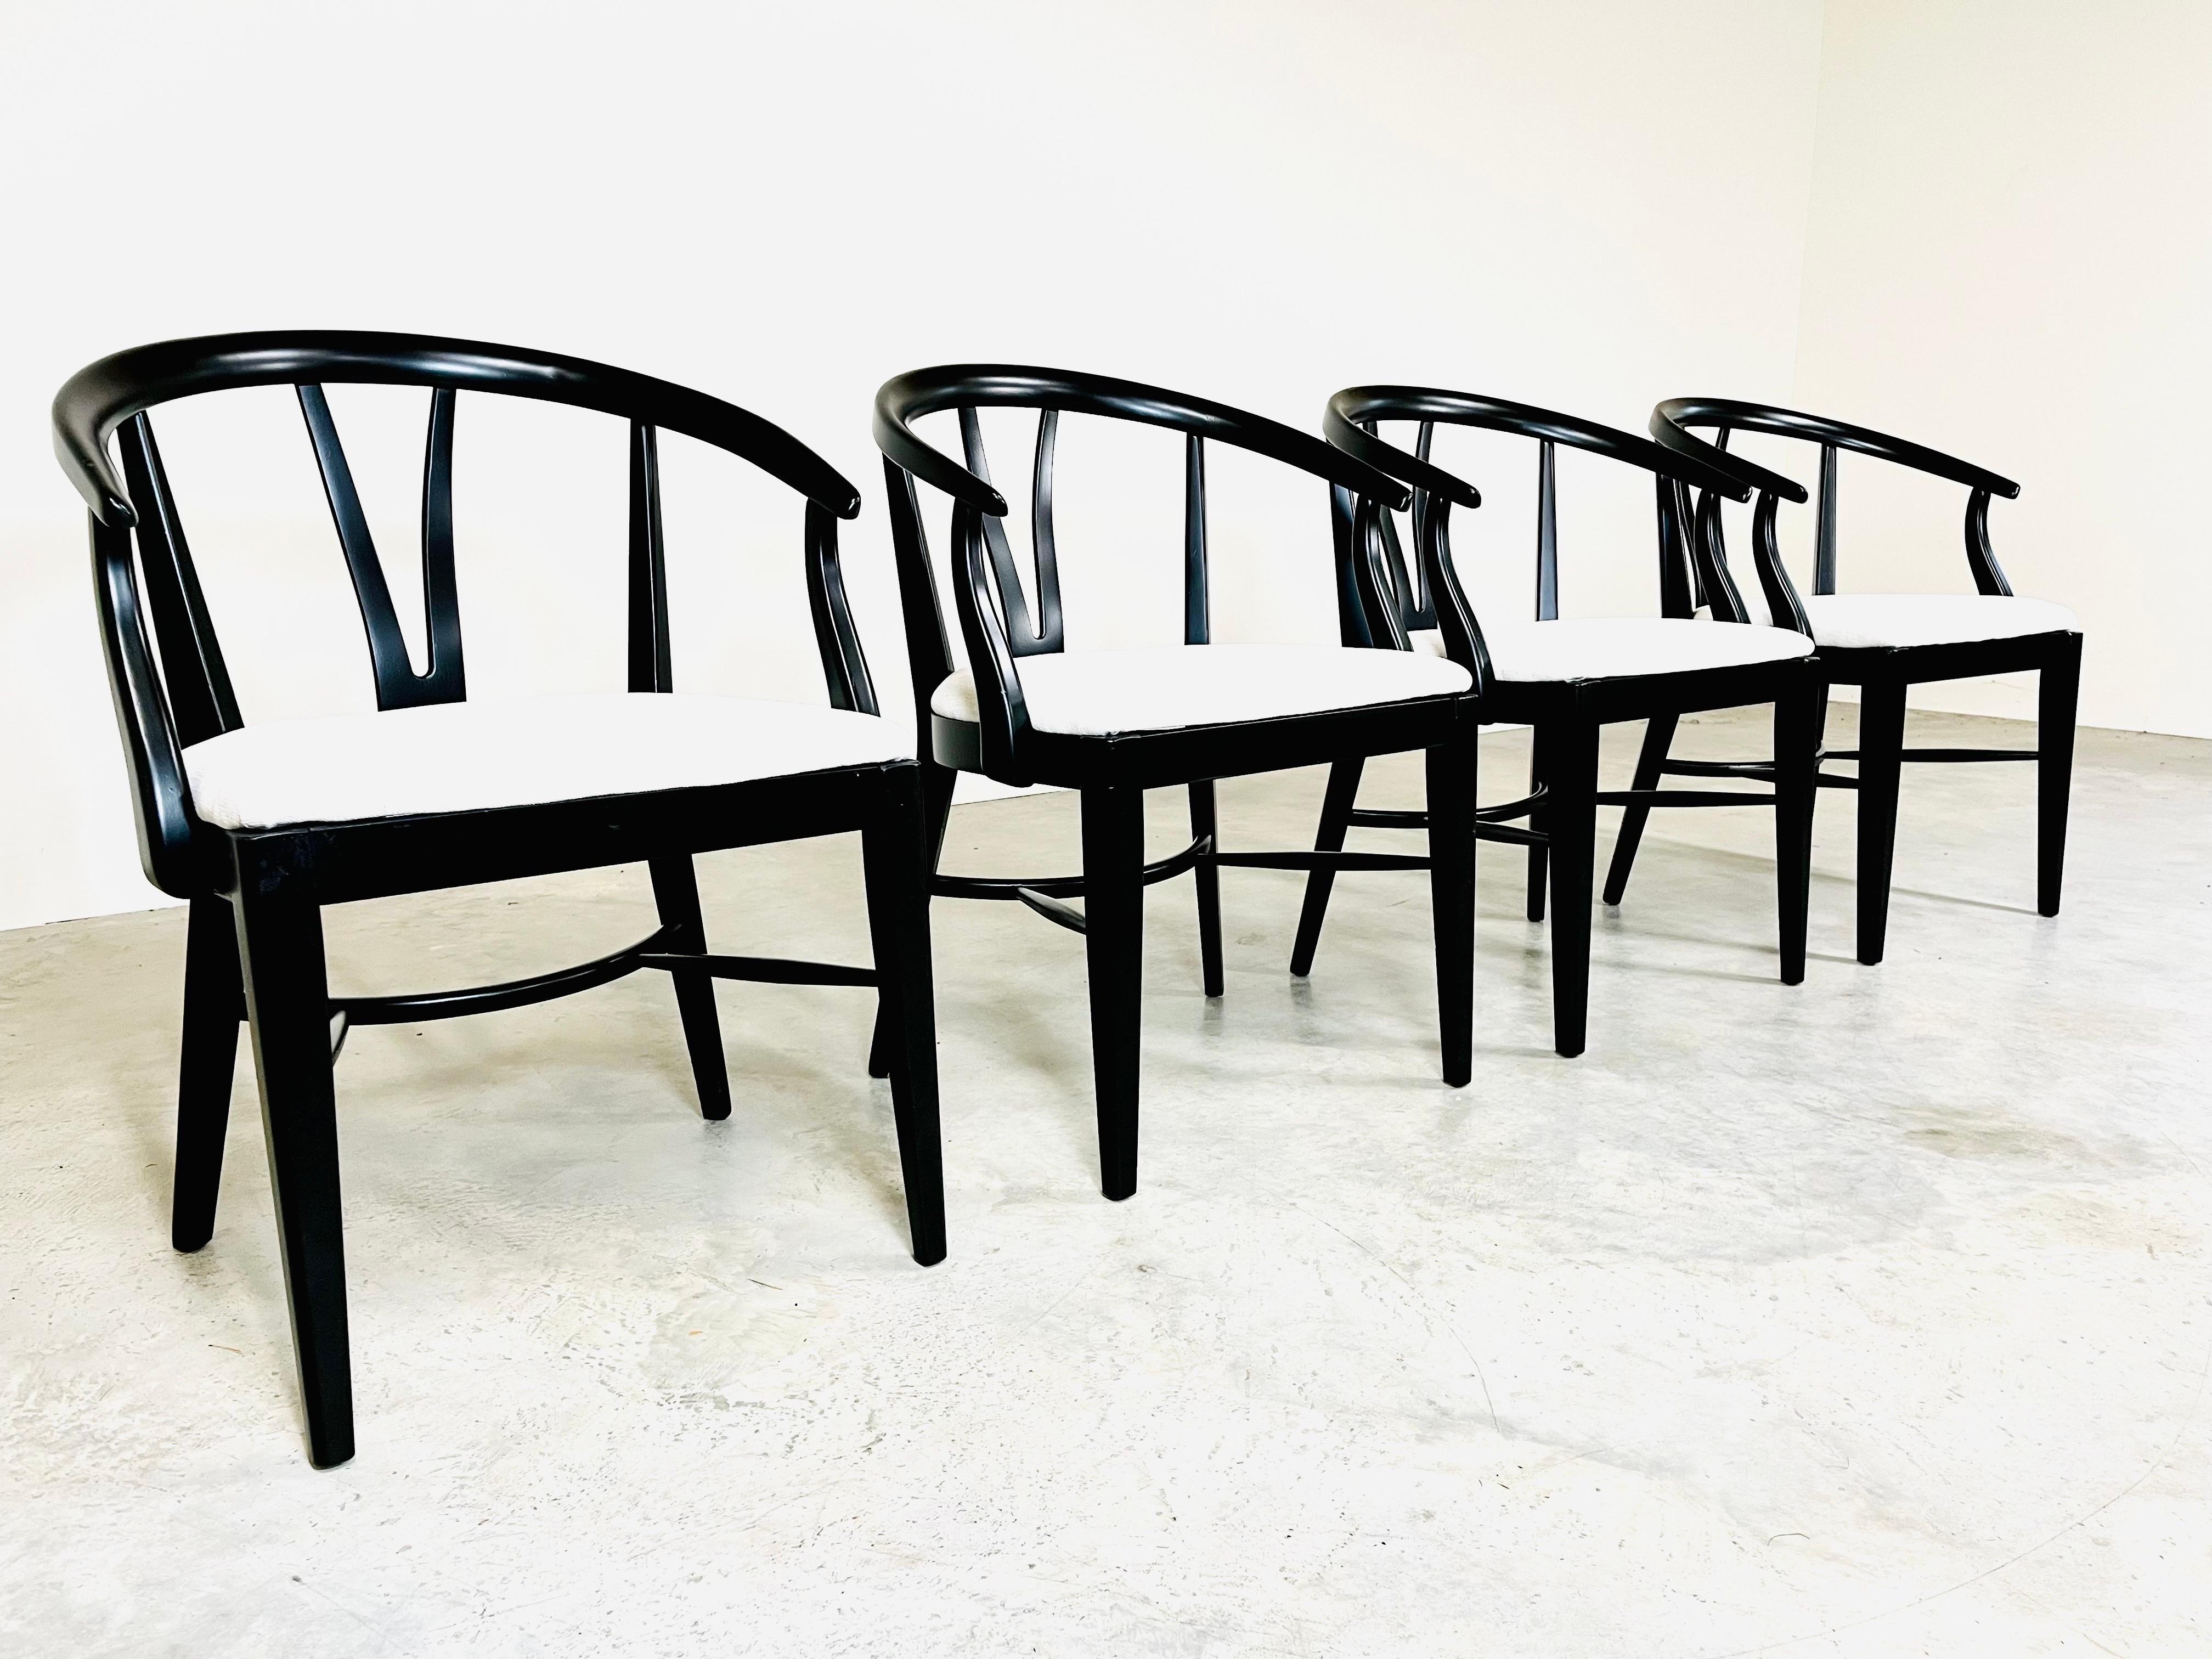 A set of 4 sculptural curved back armchairs in the manner of Hans Wegner’s Wishbone chair having black lacquer finish with brand new chenille fabric with fresh cushioning. All chairs are signed with original Blowing Rock of N.C. tags, are solid and